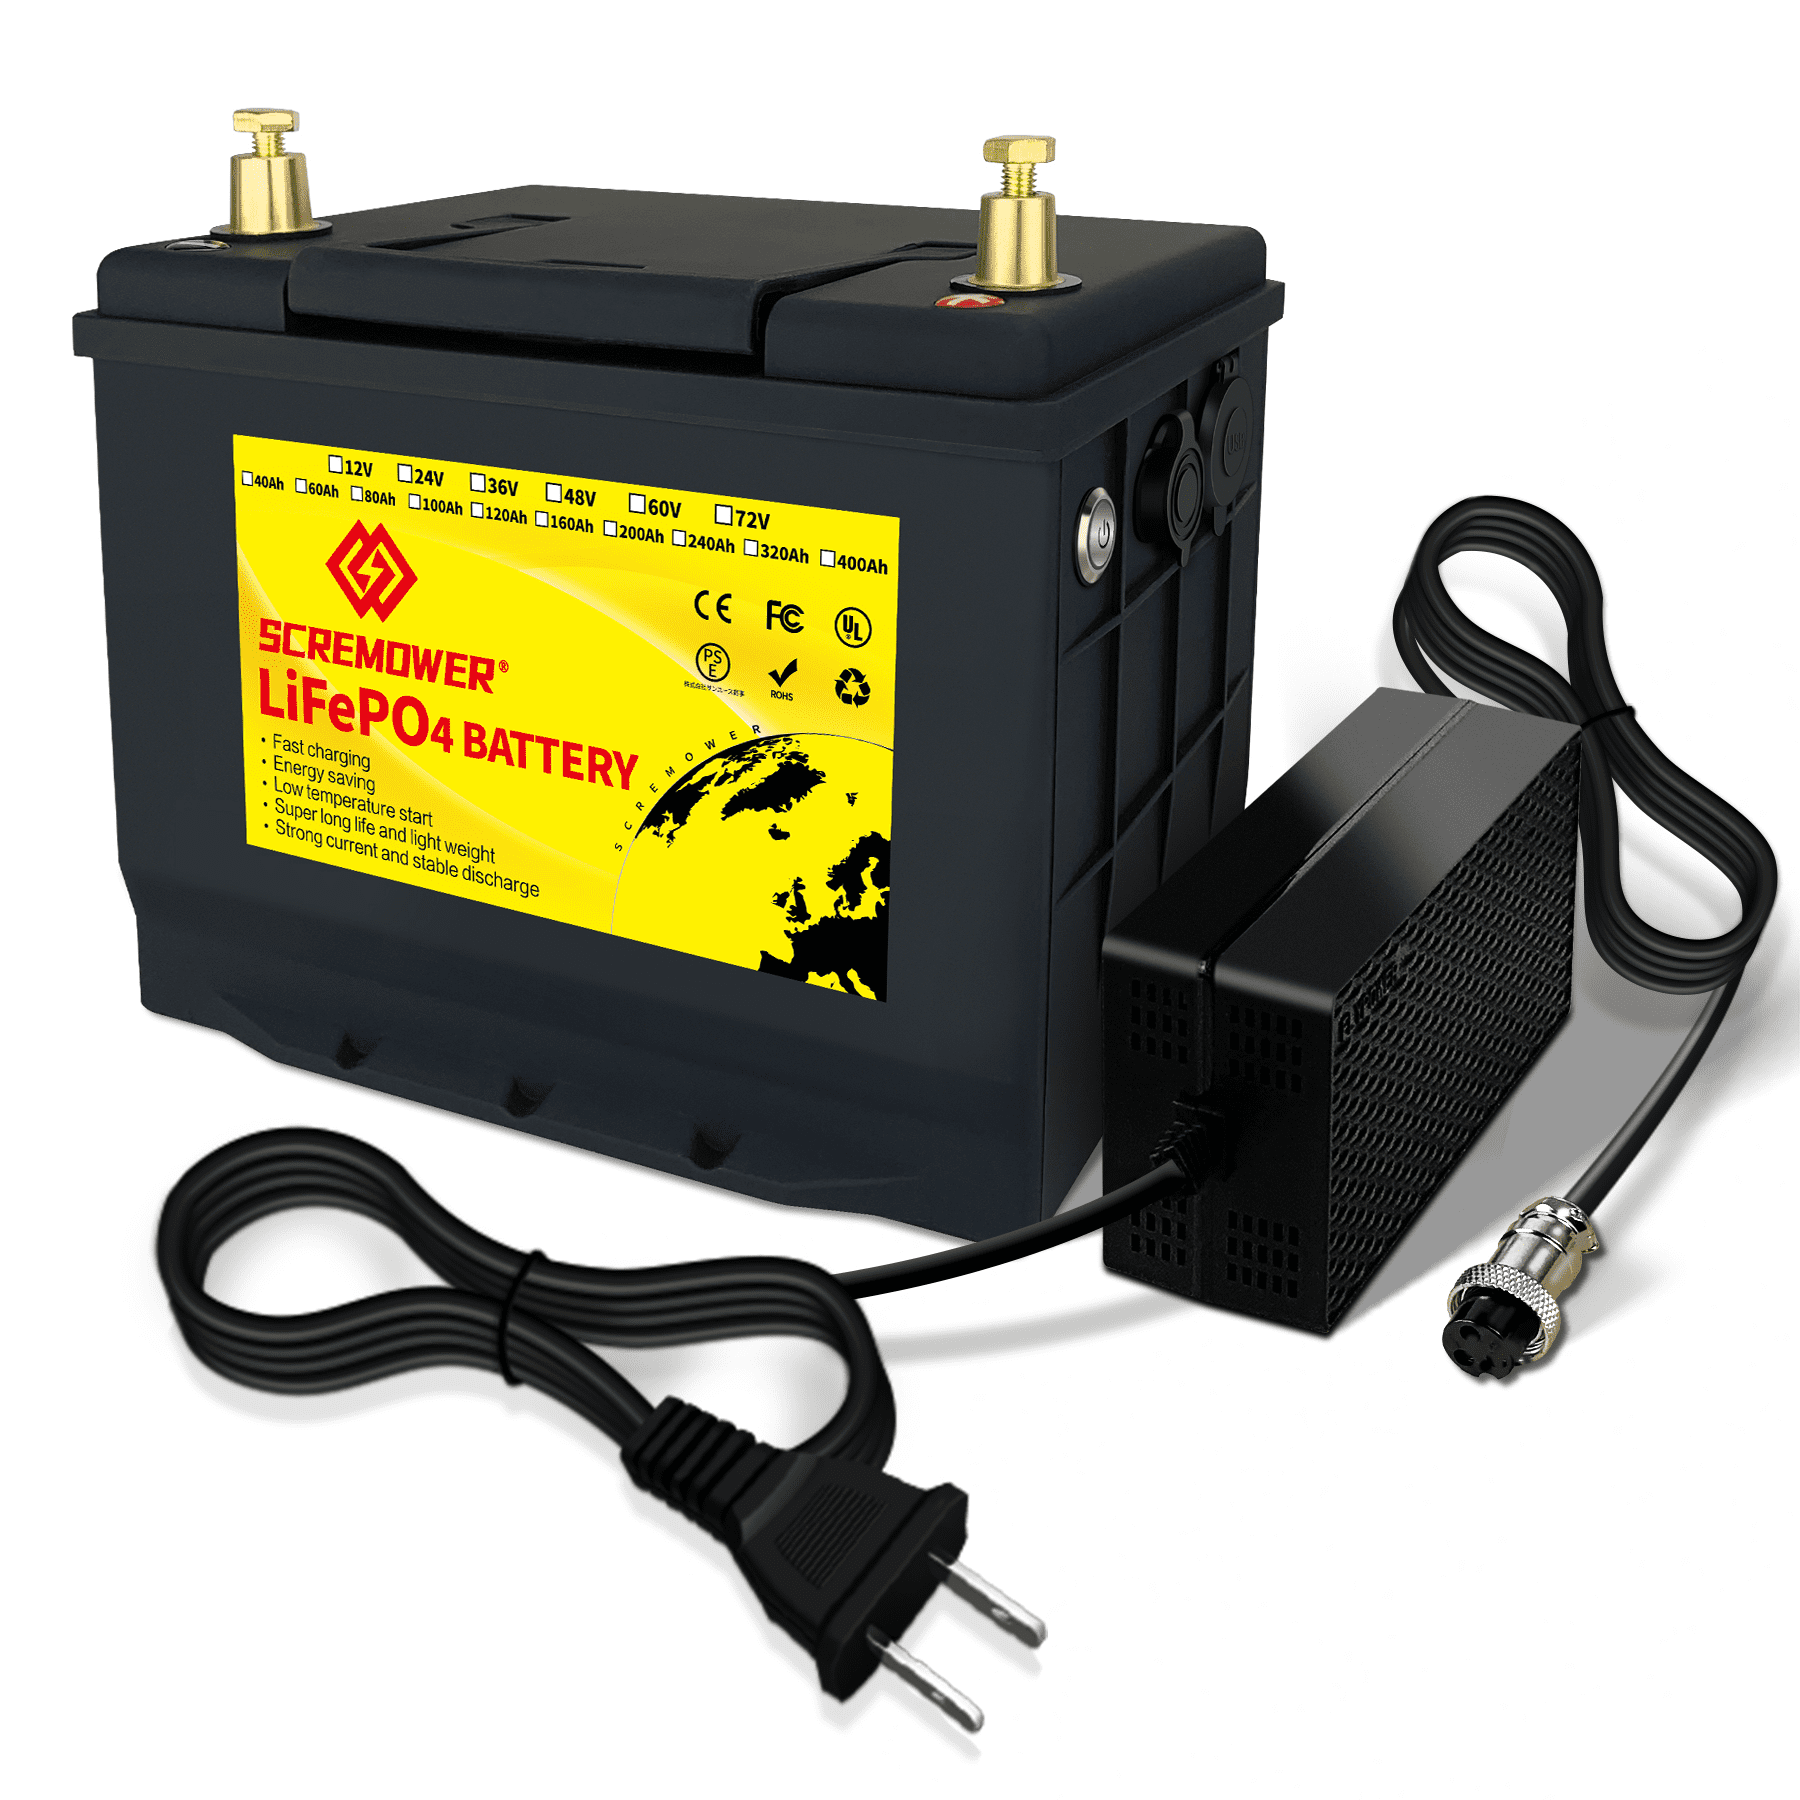 12V LiFePO4 Battery 60Ah, Lithium Batteries with 50A BMS, Rechargeable Deep  Cycle, widely used for Trolling Motor, Marine, Camper, RV, Solar Power, Off  Grid, Lawn Mower, Household Appliances 